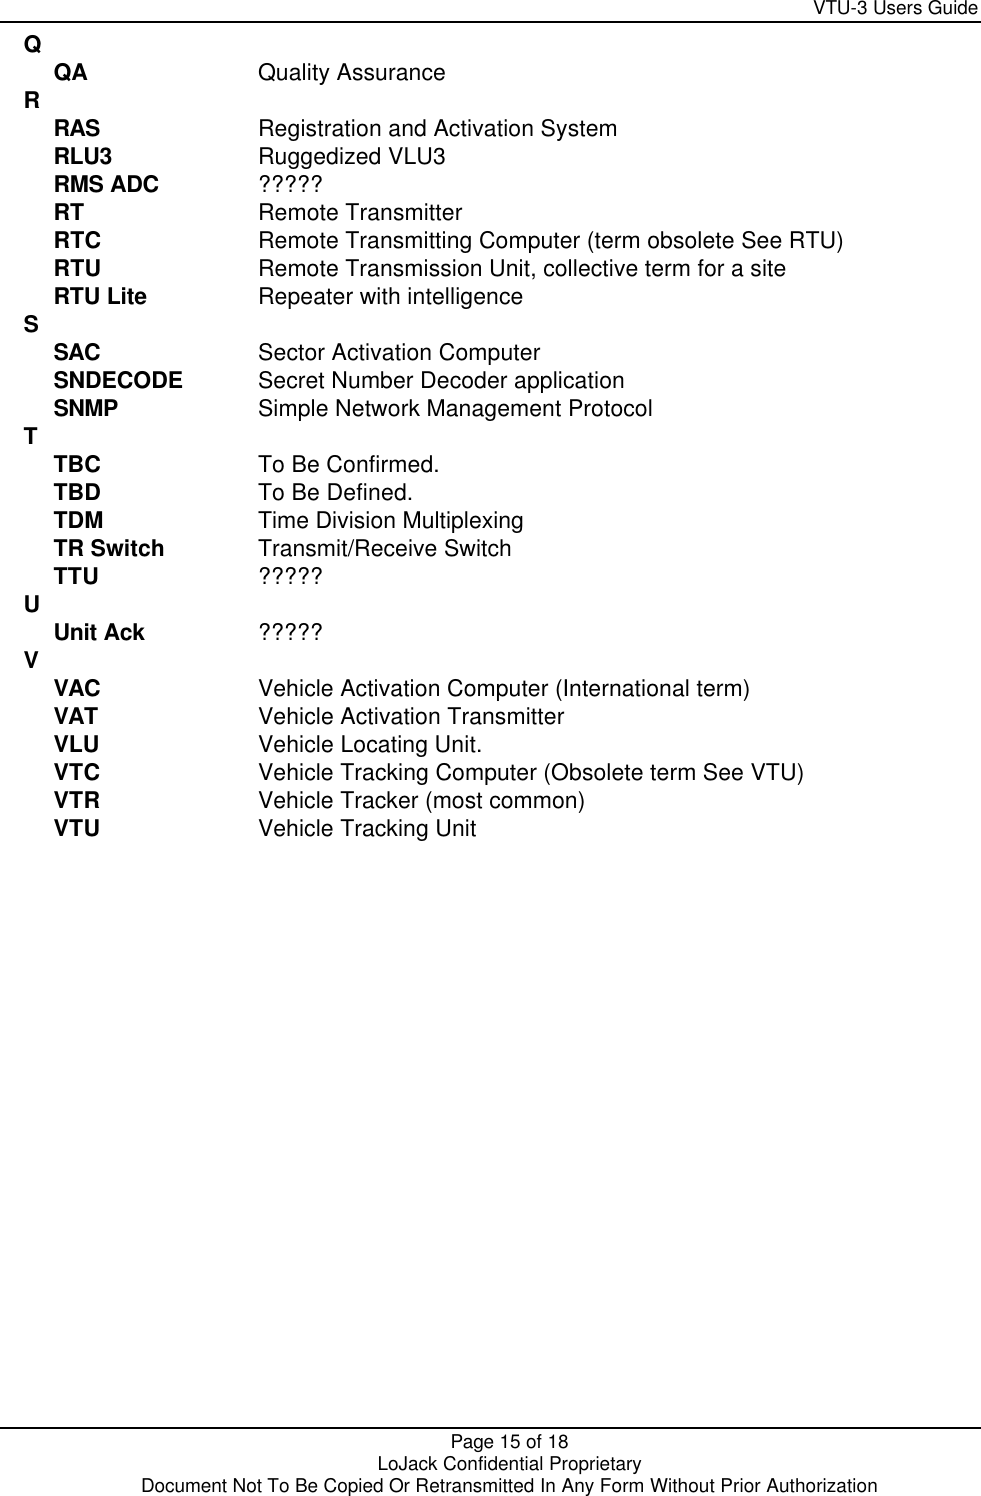     VTU-3 Users Guide  Page 15 of 18    LoJack Confidential Proprietary  Document Not To Be Copied Or Retransmitted In Any Form Without Prior Authorization Q   QA Quality Assurance R  RAS Registration and Activation System RLU3 Ruggedized VLU3 RMS ADC ????? RT Remote Transmitter RTC Remote Transmitting Computer (term obsolete See RTU) RTU Remote Transmission Unit, collective term for a site RTU Lite Repeater with intelligence S  SAC Sector Activation Computer SNDECODE Secret Number Decoder application SNMP Simple Network Management Protocol T  TBC To Be Confirmed. TBD To Be Defined. TDM Time Division Multiplexing TR Switch Transmit/Receive Switch TTU ????? U  Unit Ack ????? V   VAC Vehicle Activation Computer (International term) VAT Vehicle Activation Transmitter VLU Vehicle Locating Unit. VTC Vehicle Tracking Computer (Obsolete term See VTU) VTR Vehicle Tracker (most common) VTU Vehicle Tracking Unit  